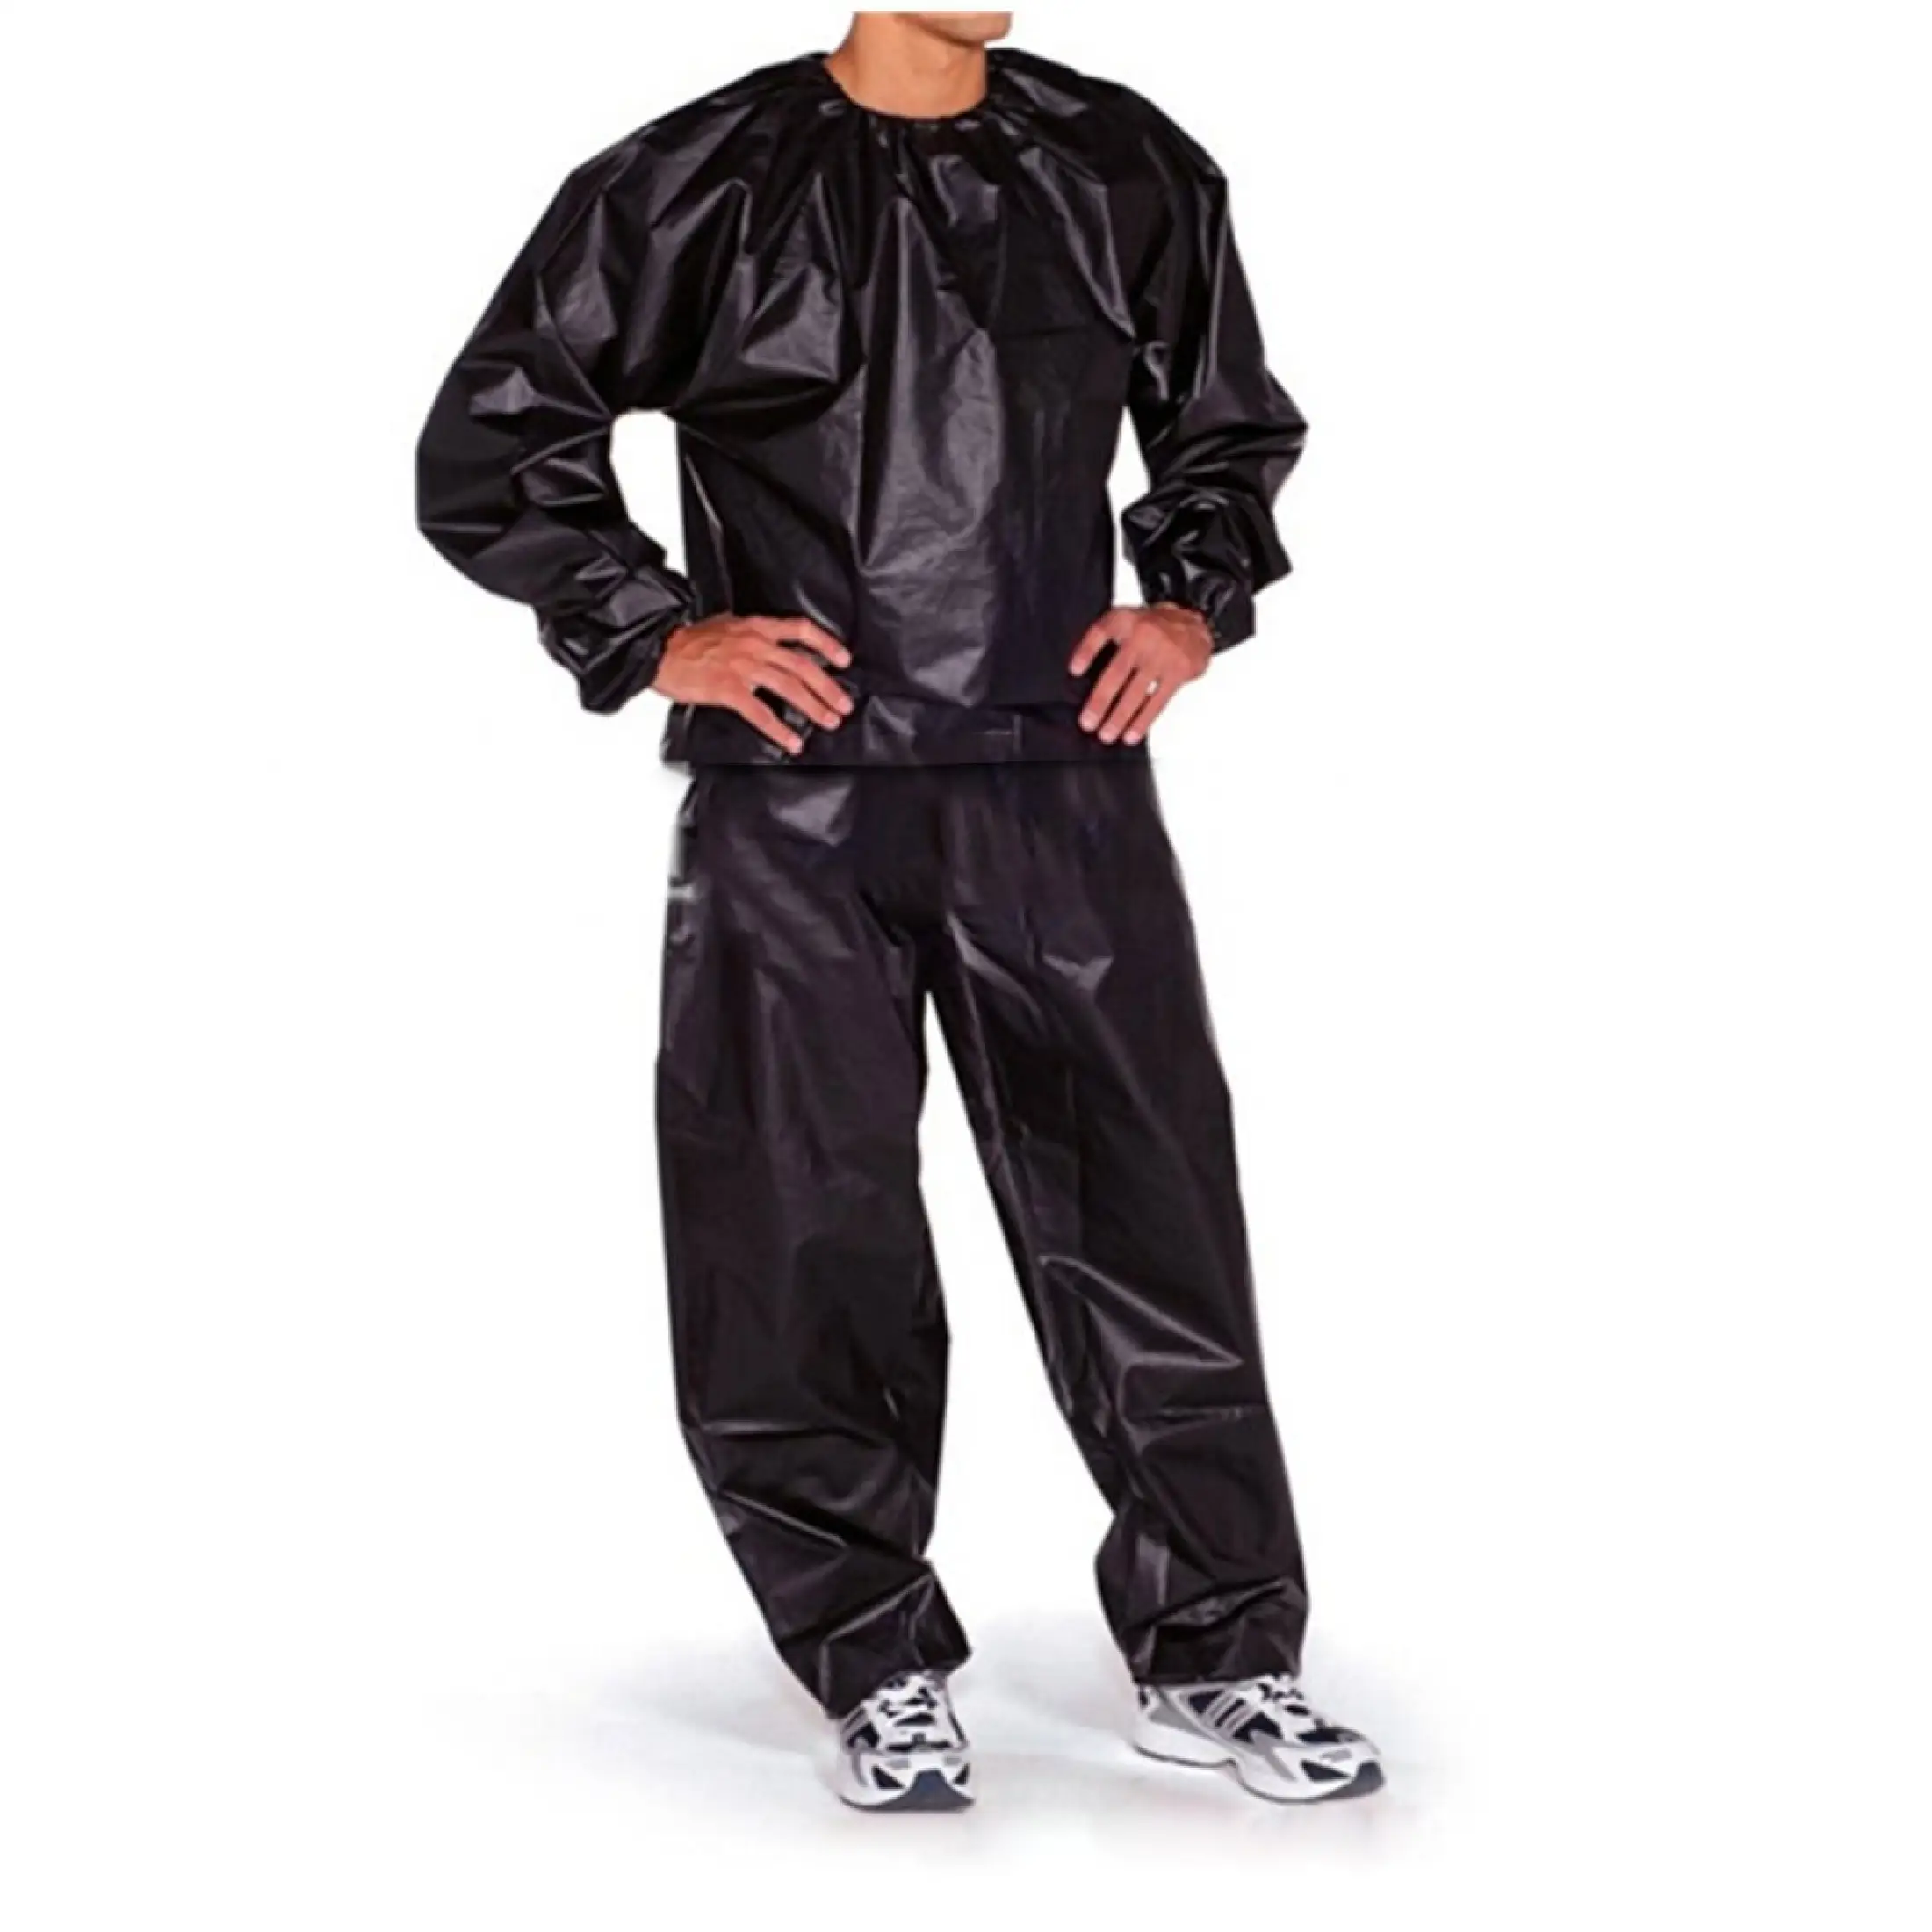 15 Minute Sauna suit workout videos for Today